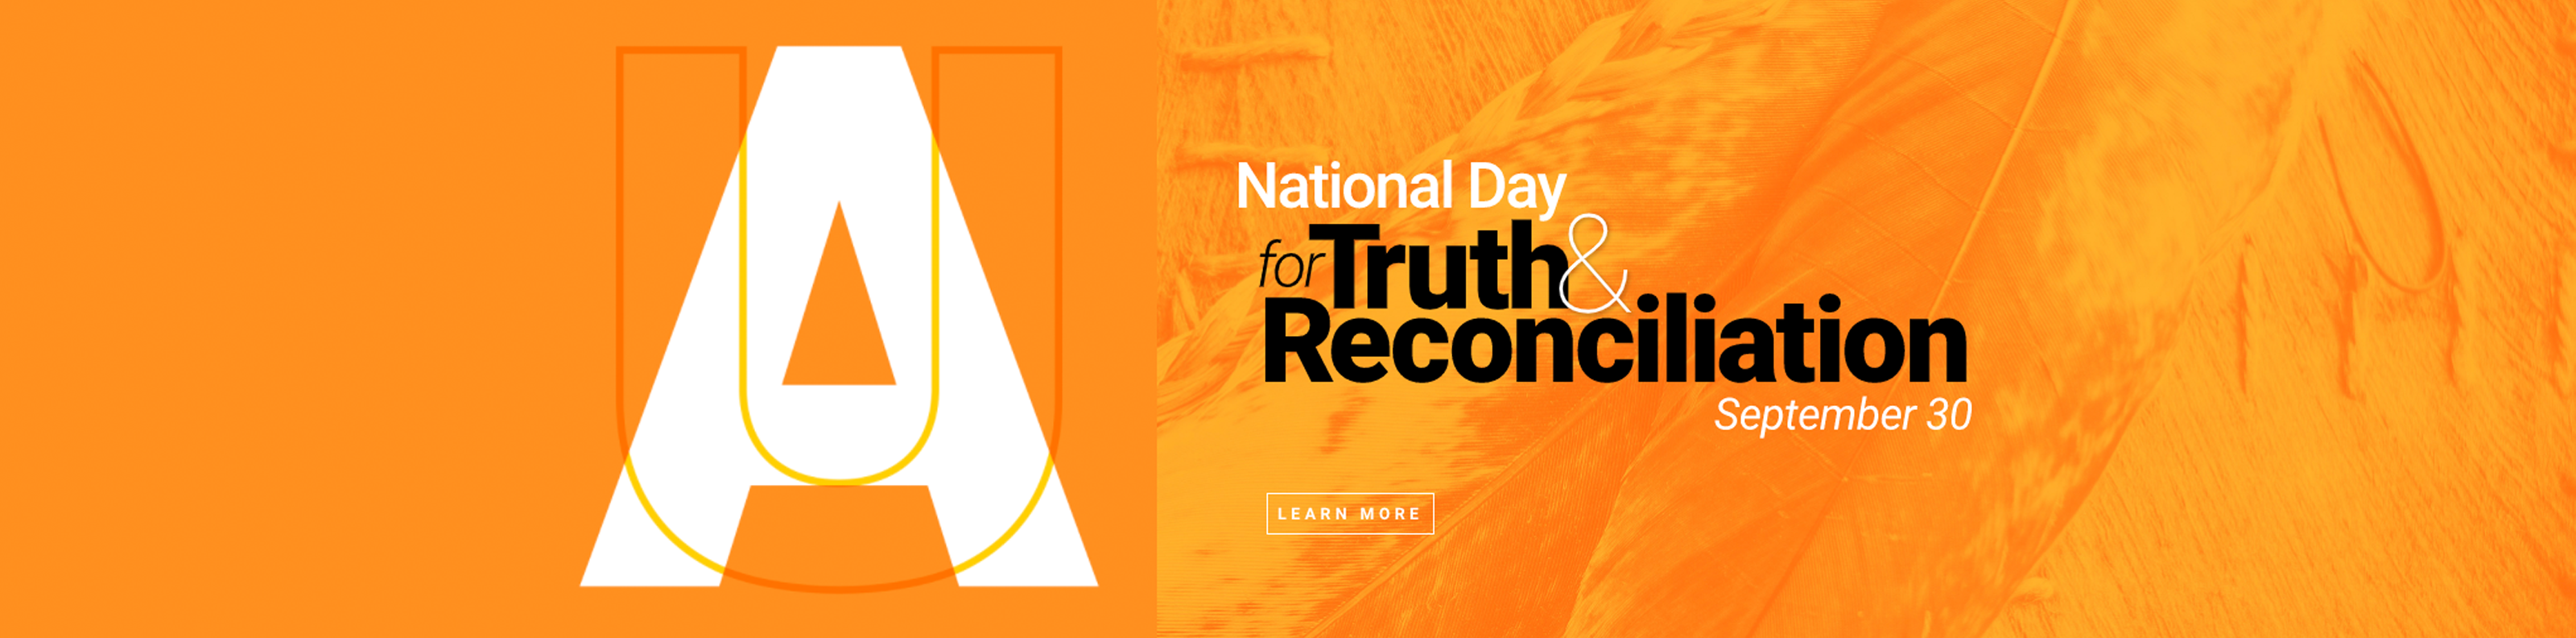 national-day-truth-reconciliation.png